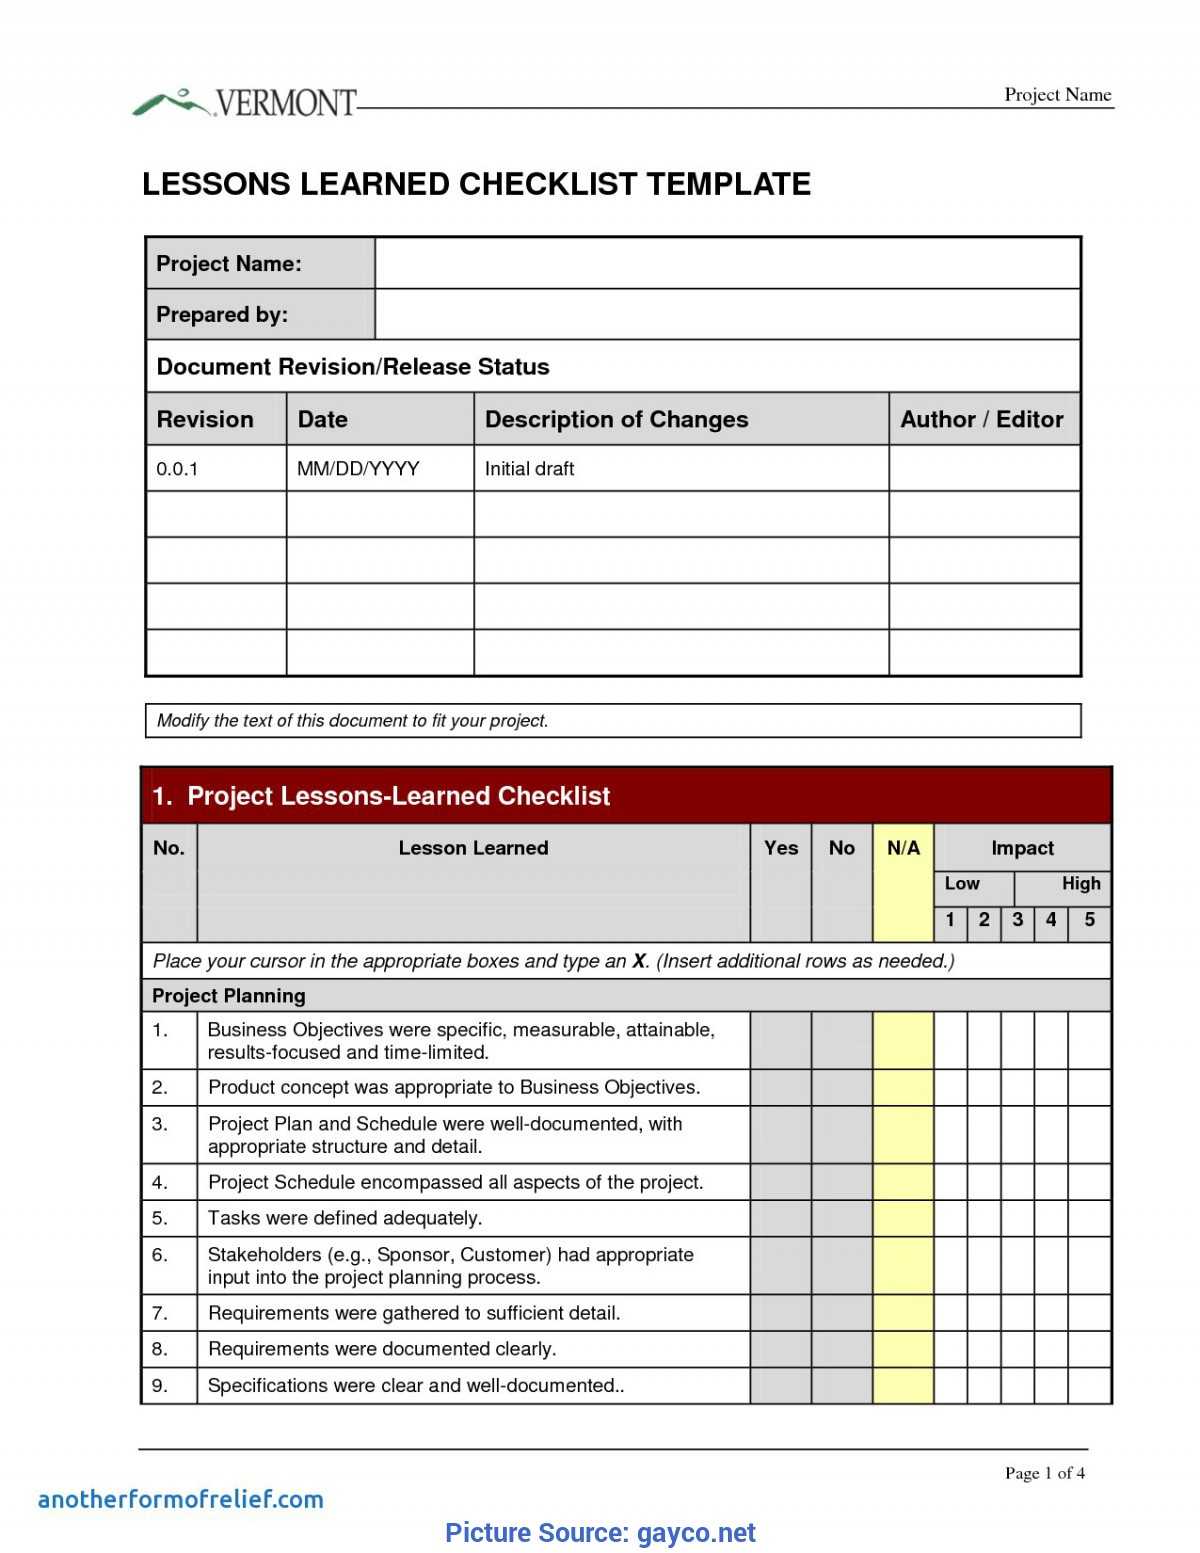 Great Lessons Learnt Template Checklist Prince2 Lessons Throughout Prince2 Lessons Learned Report Template